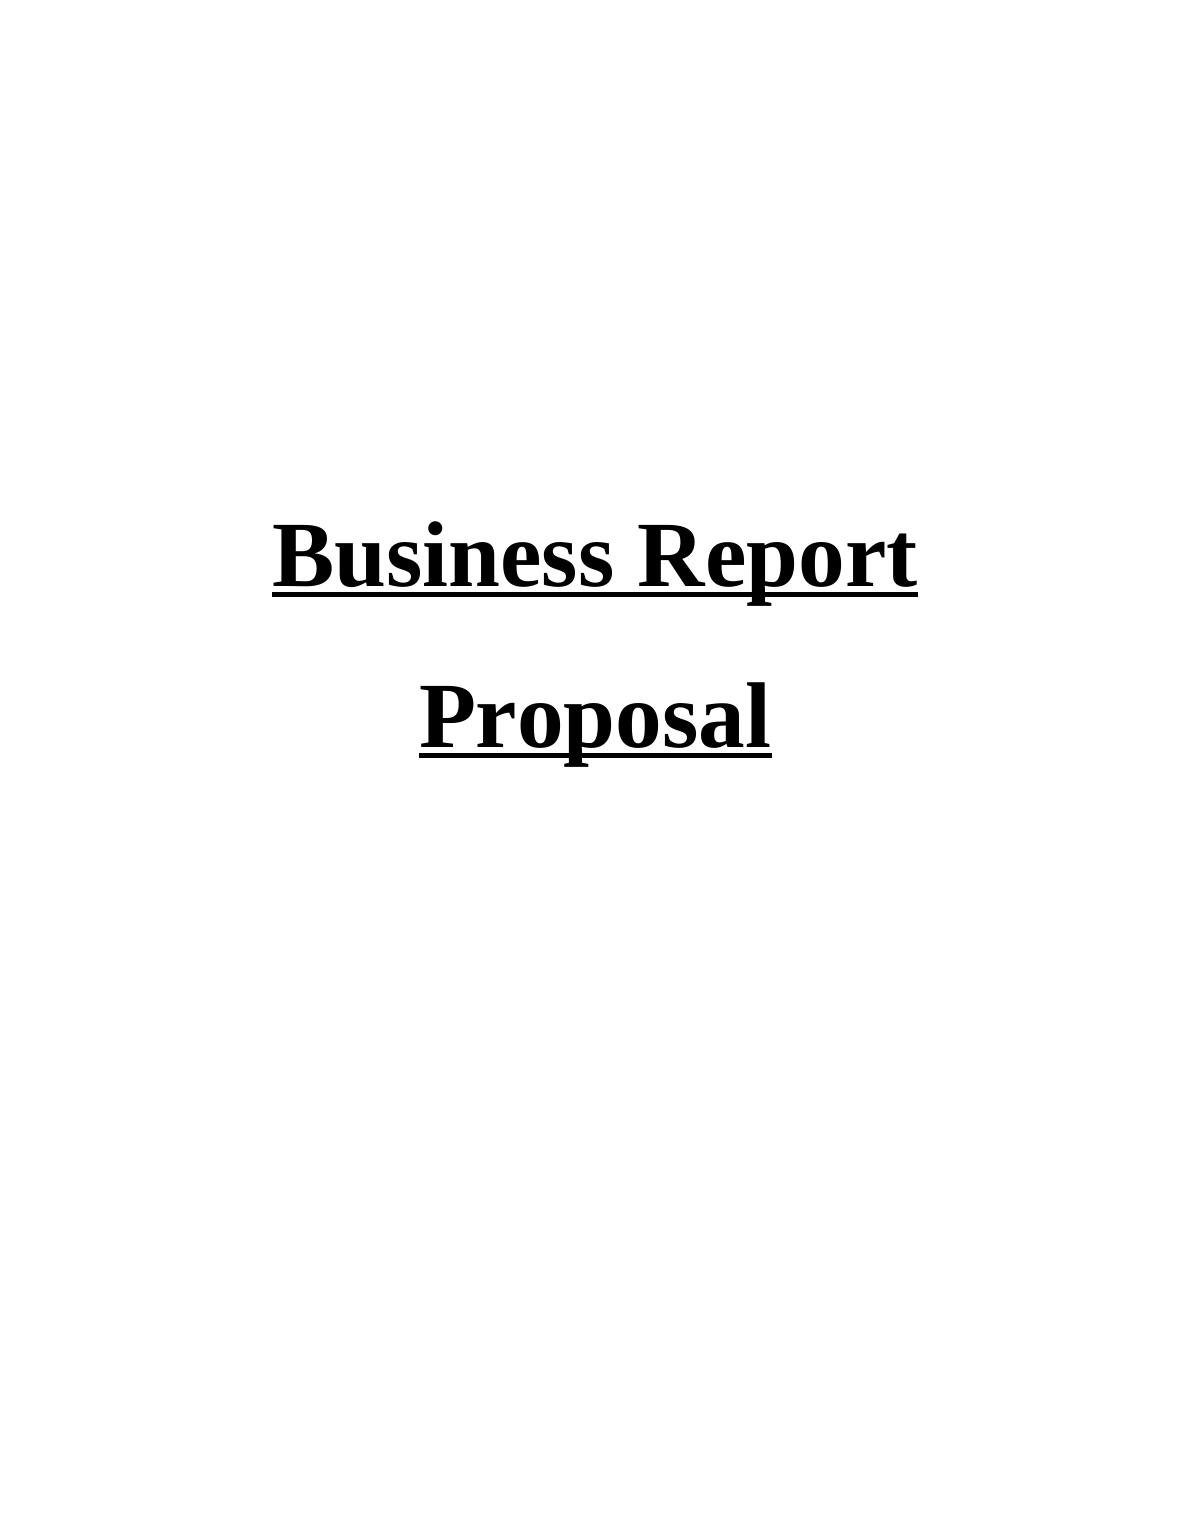 Business Report Proposal Assignment Solved_1